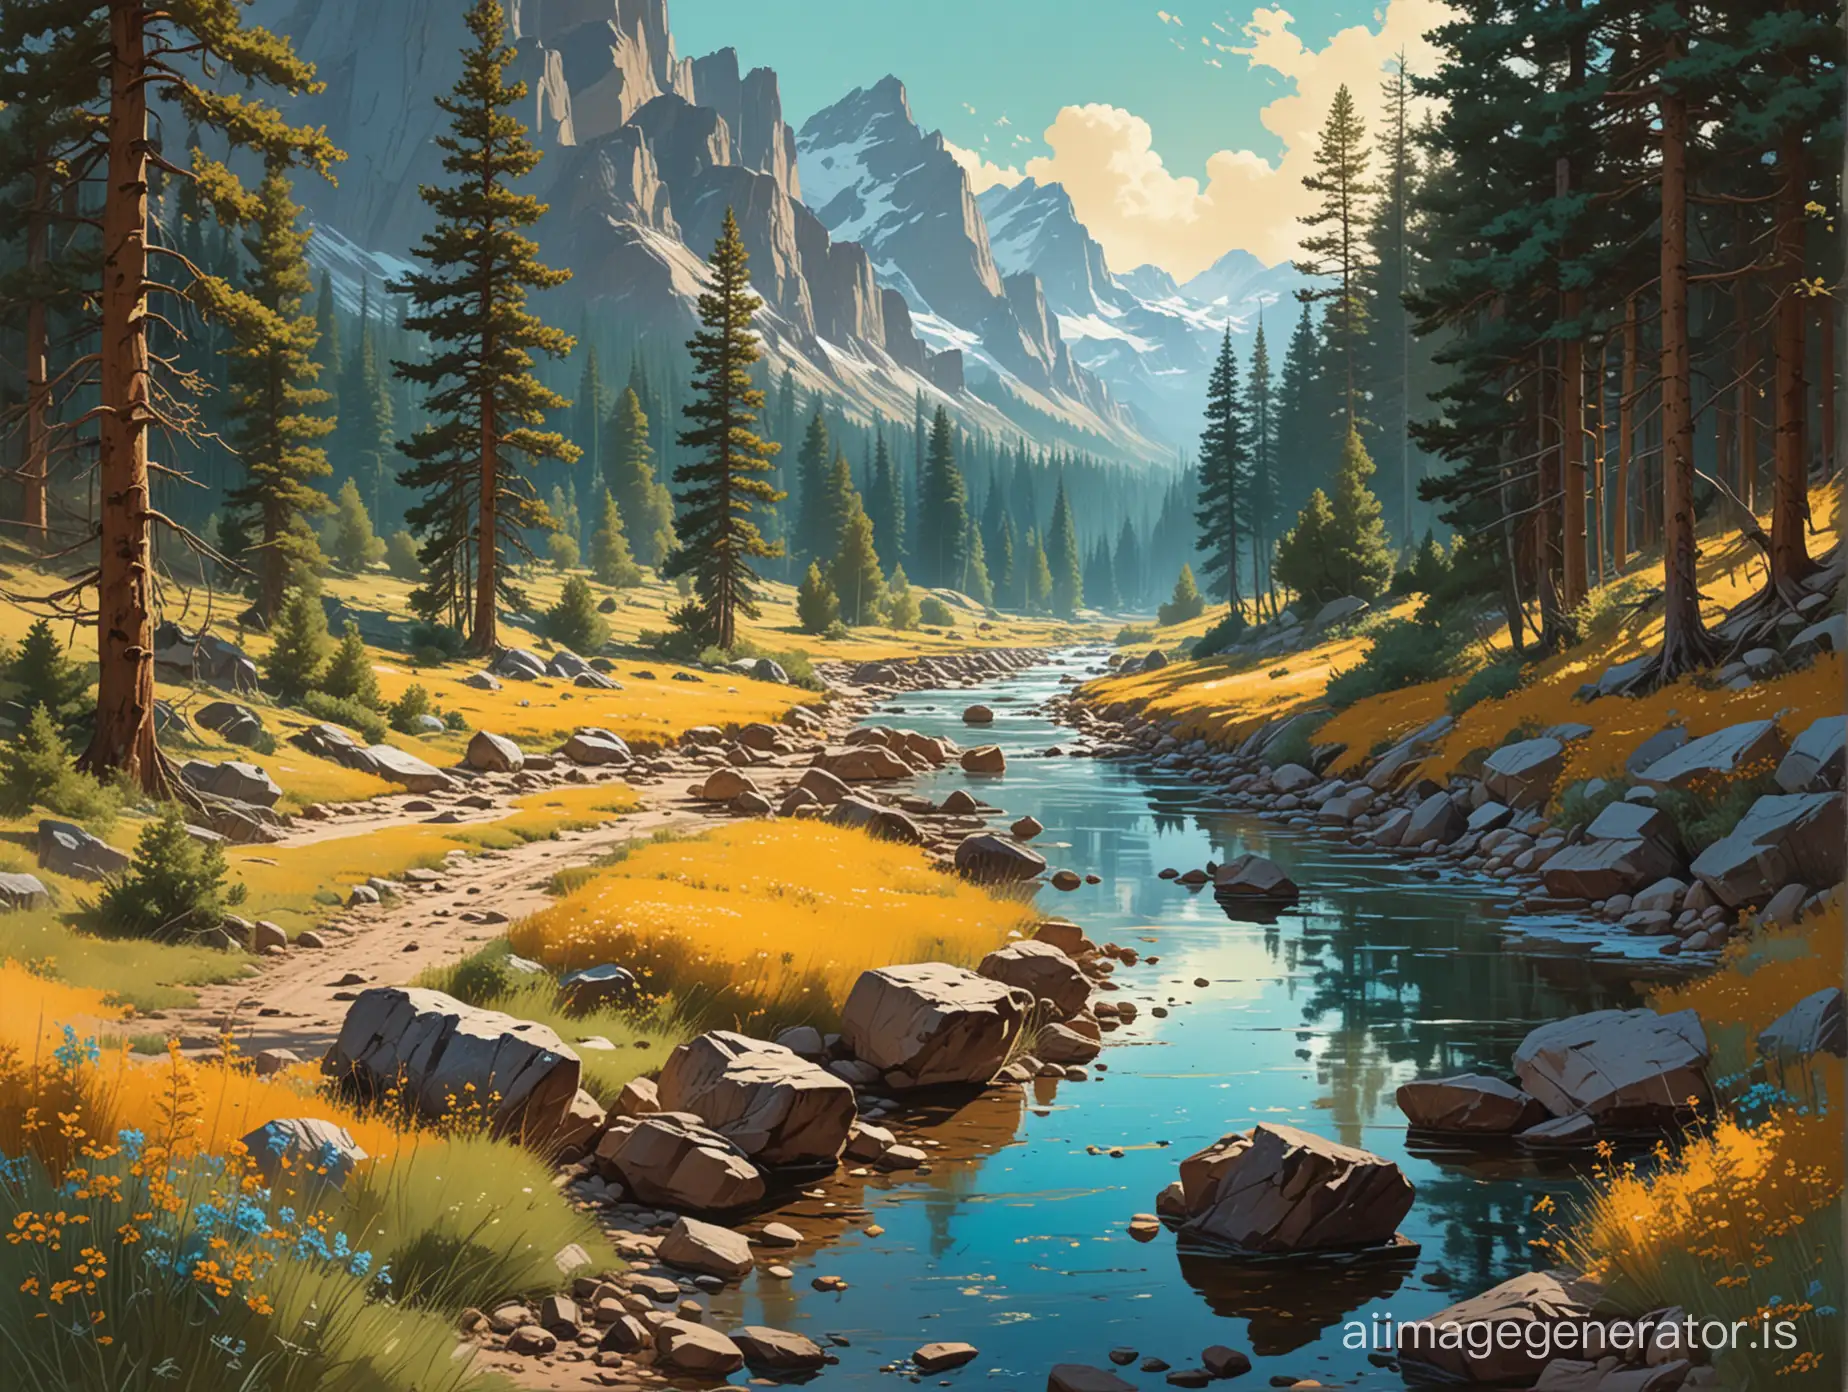 the wild frontier poster by steve daines, in the style of contemporary landscapes, light amber and turquoise, swiss realism, david hettinger, arcadian landscapes, ps1 graphics, hyper-detailed illustrations